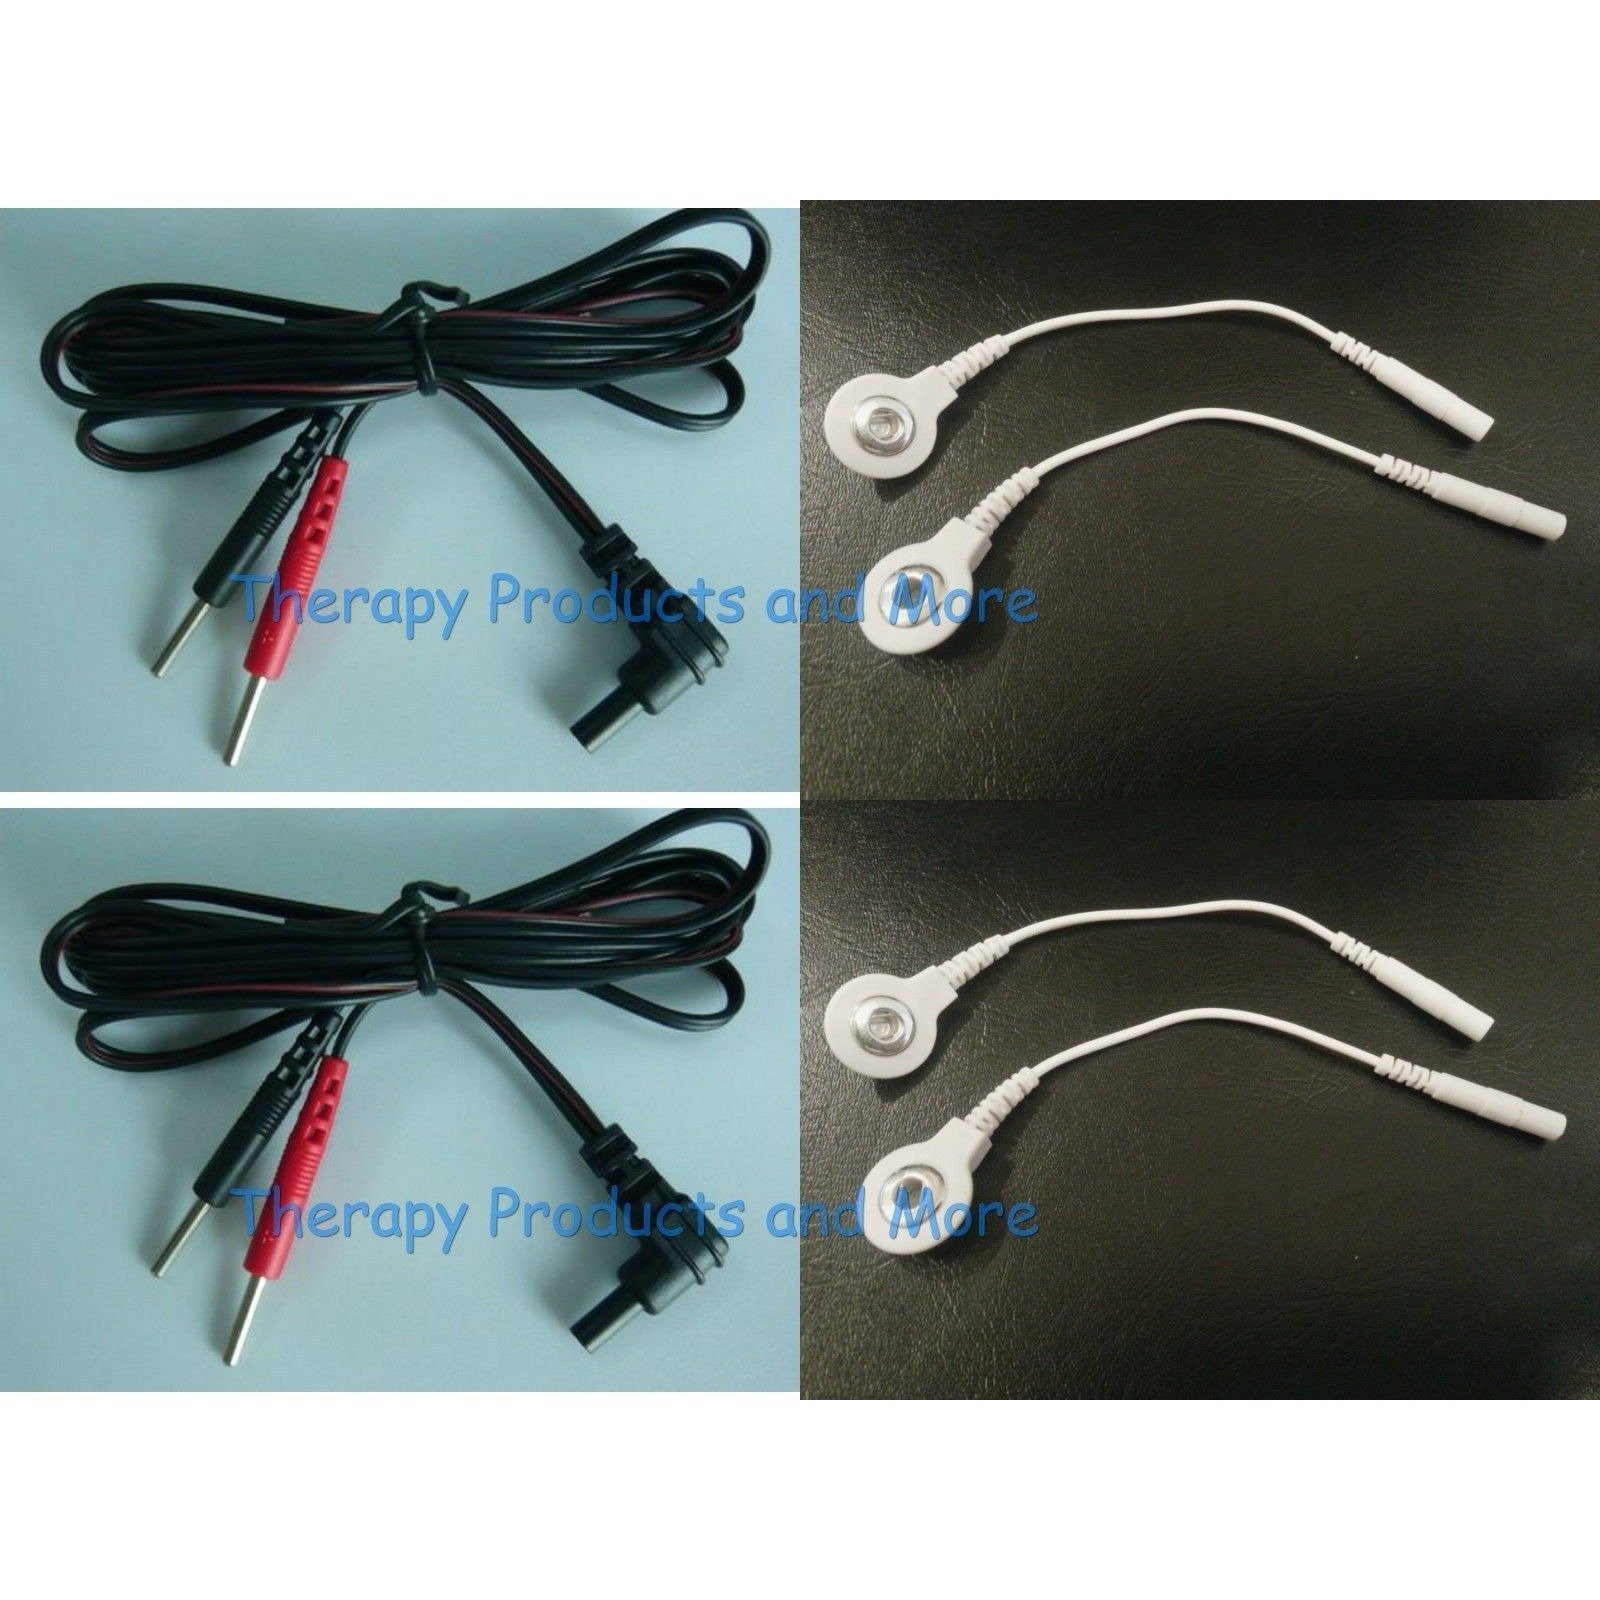 2 Electrode Cables for EMSI-2000 2001 2500 5000 Massagers-Use Snap OR Pin Pads! - $18.95